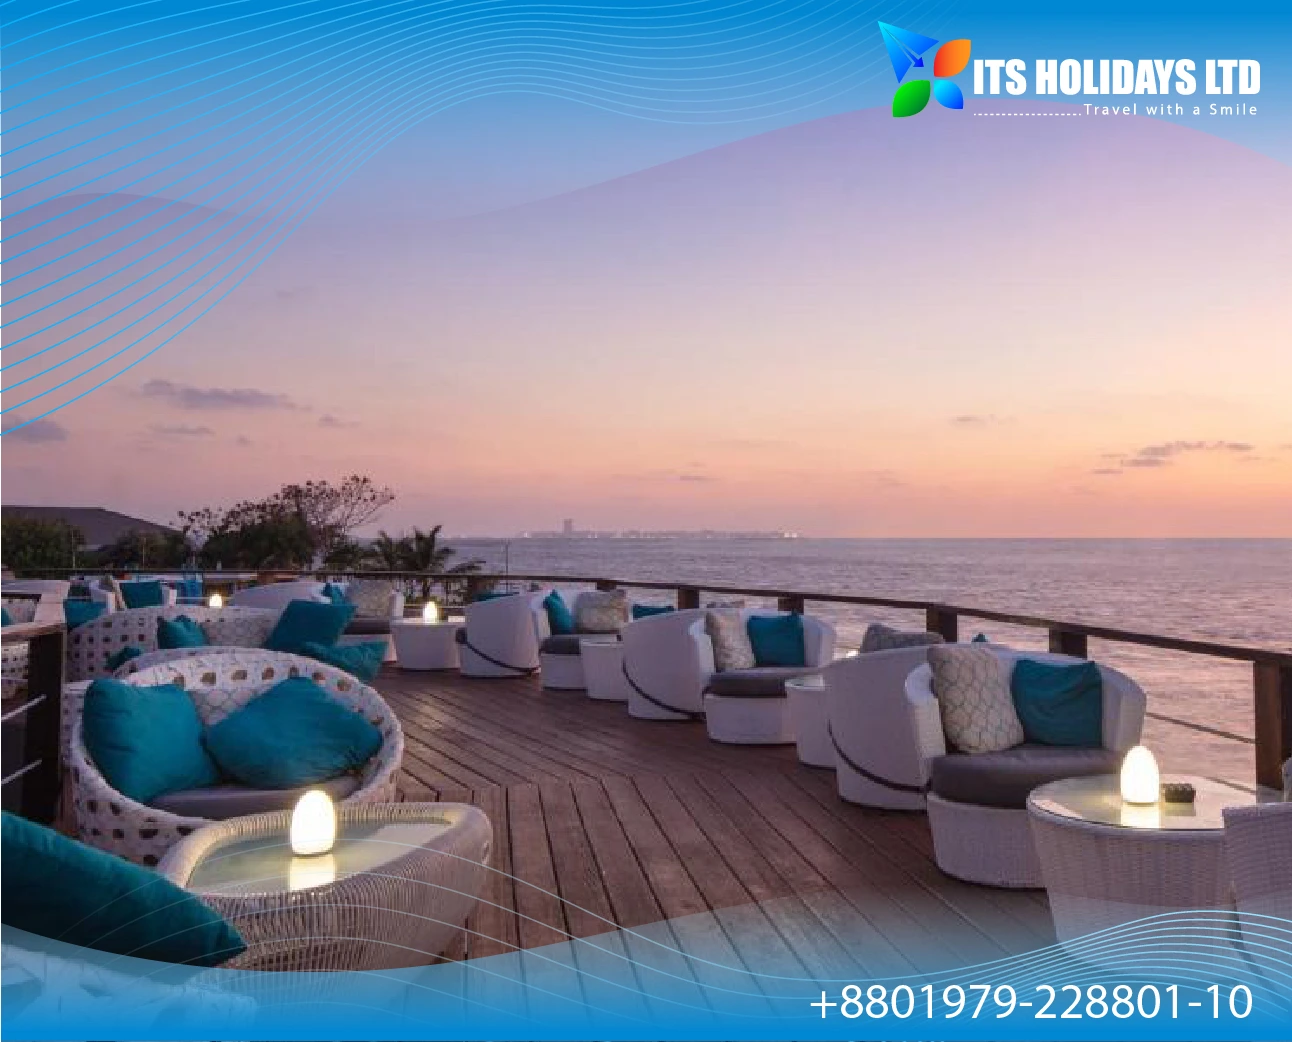 Romantic Maldives Tour Package from Bangladesh - 2